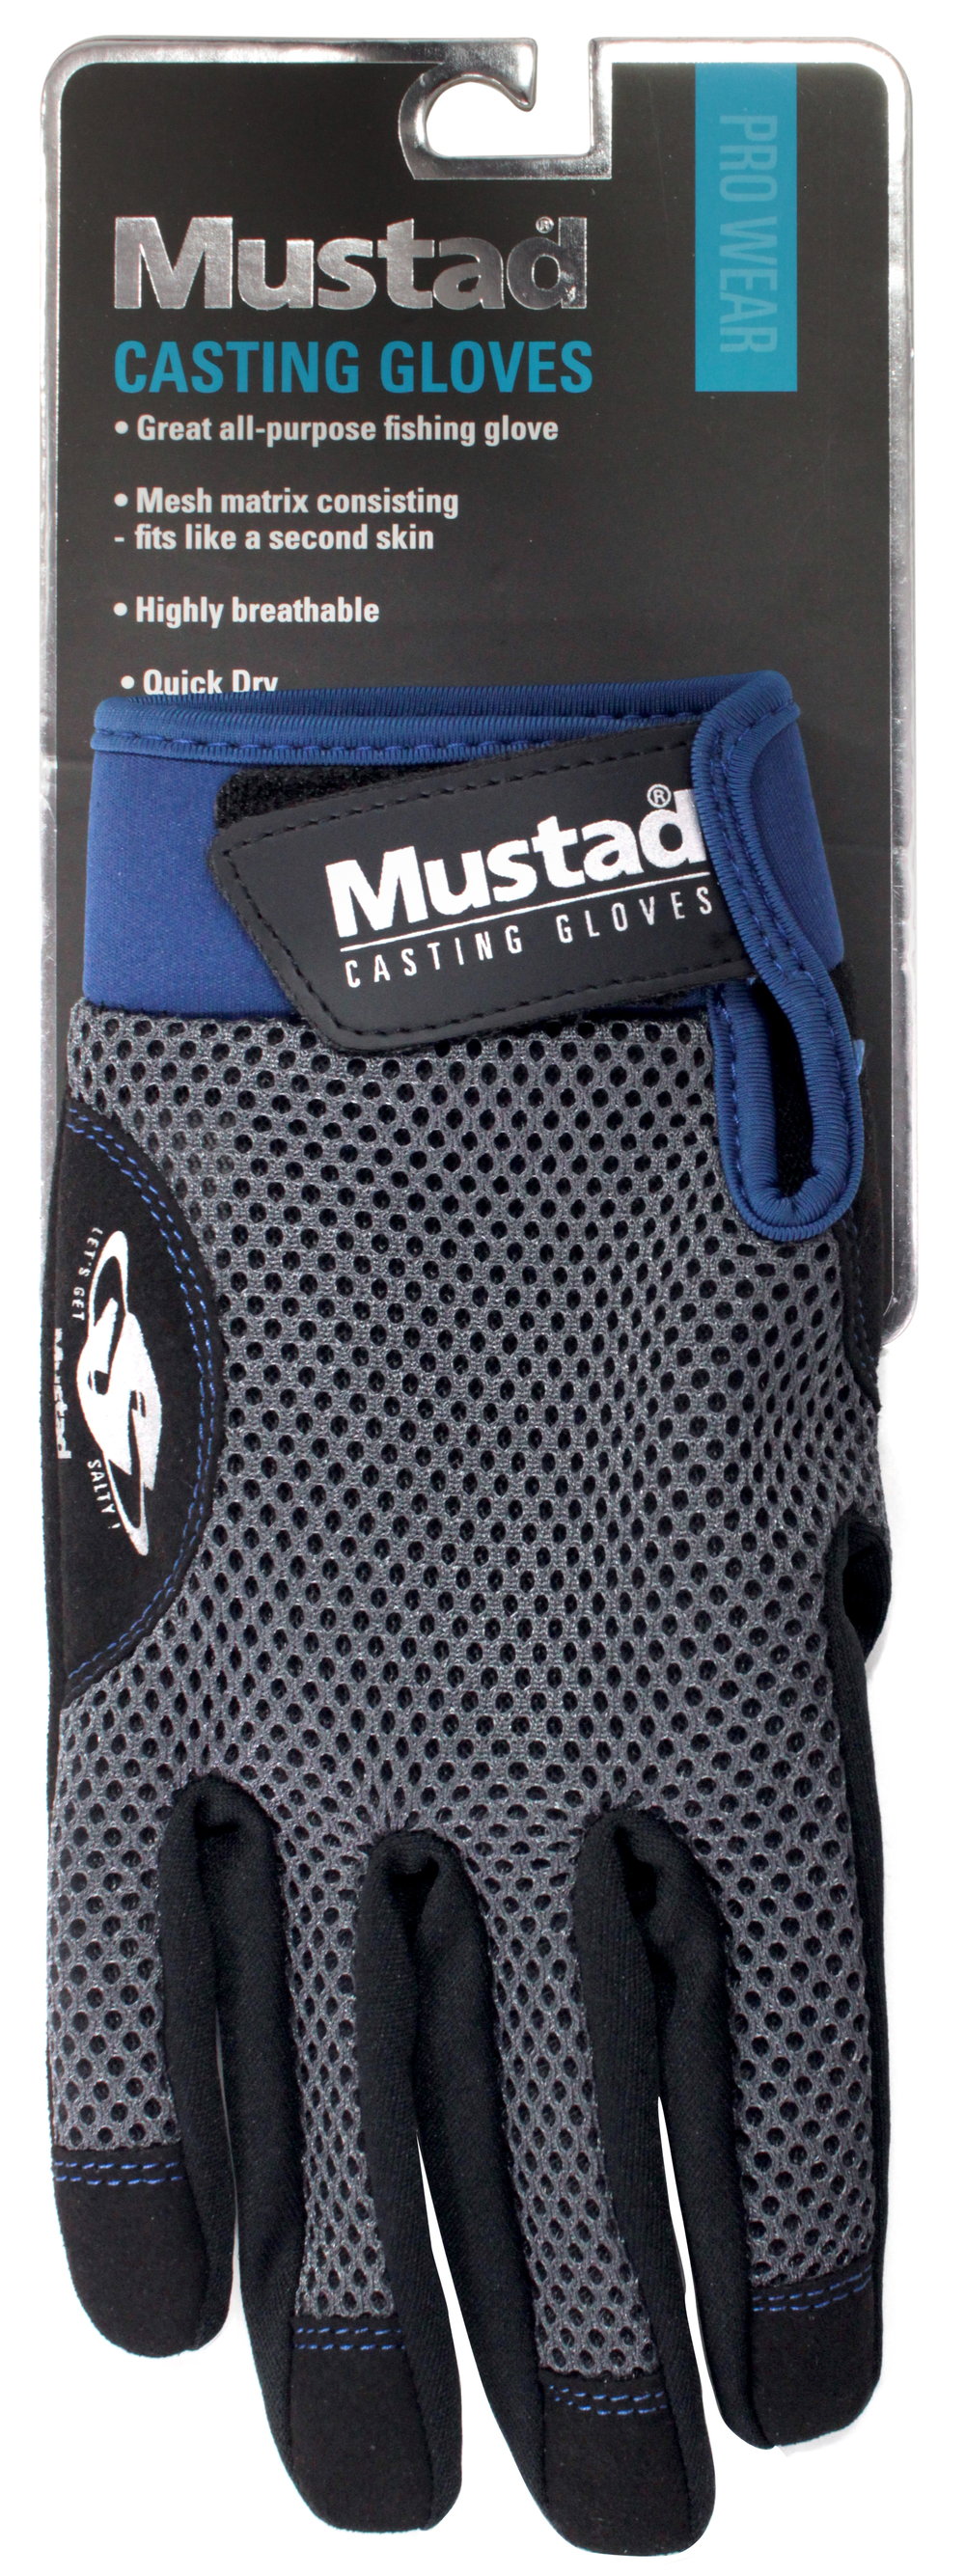 Mustad Landing/Casting Gloves Carp Pike Coarse Bass GT Sea Lure Fishing Tackle 